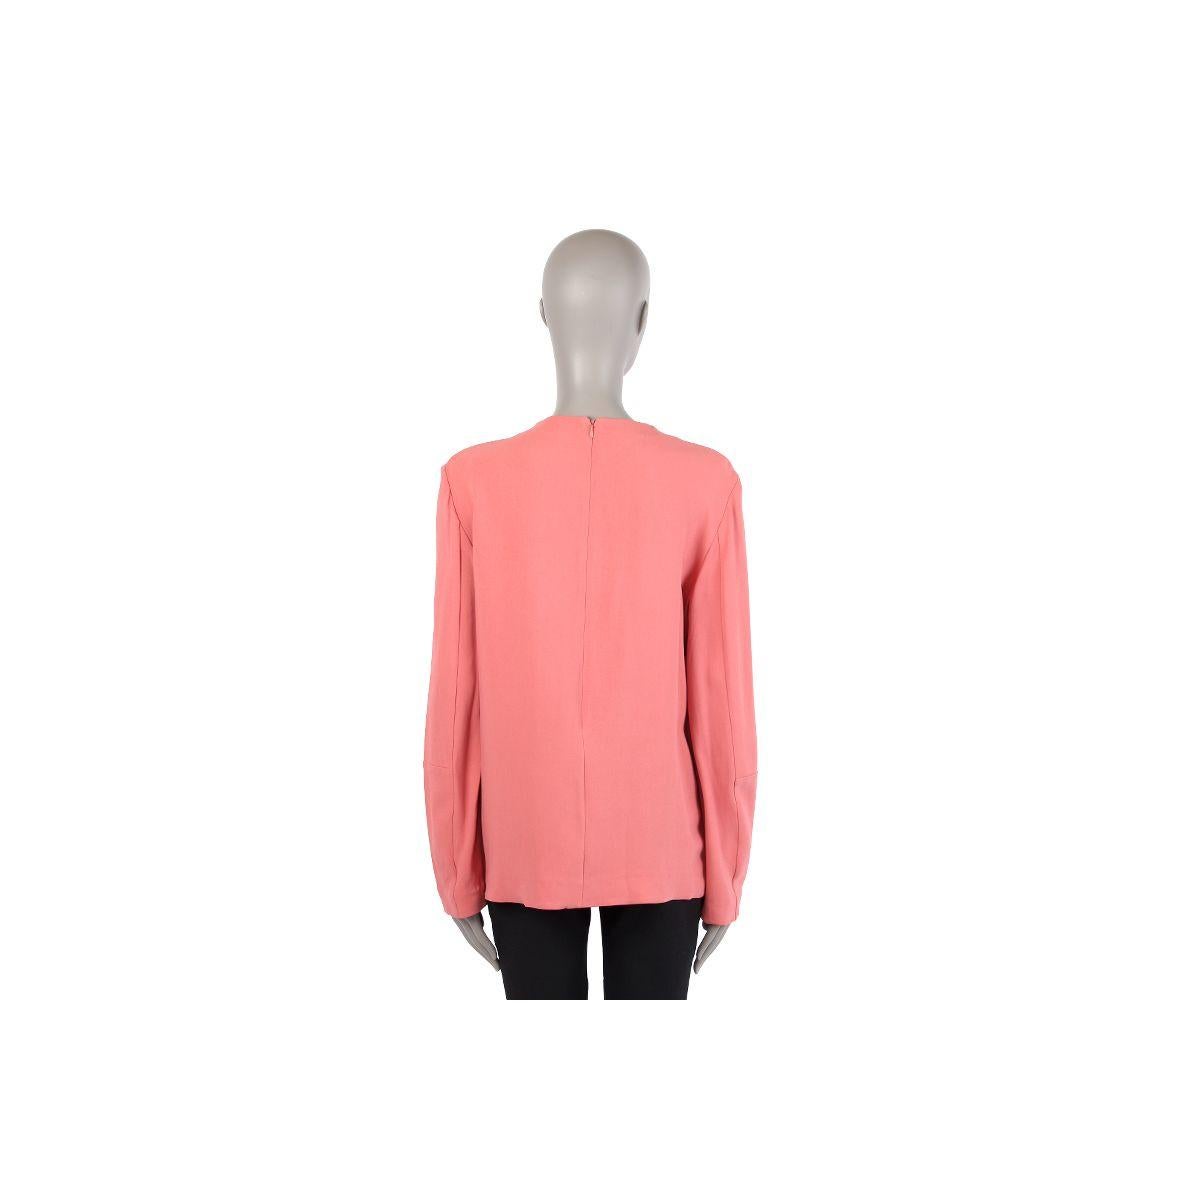 100% authentic Stella McCartney long sleeve, keyhole neck blouse in salmon pink rayon (44%), acetate (32%) and elastane (4%). Has been worn and is in excellent condition.

Measurements
Model	Keyhole Neck
Tag Size	46
Size	XL
Shoulder Width	44cm